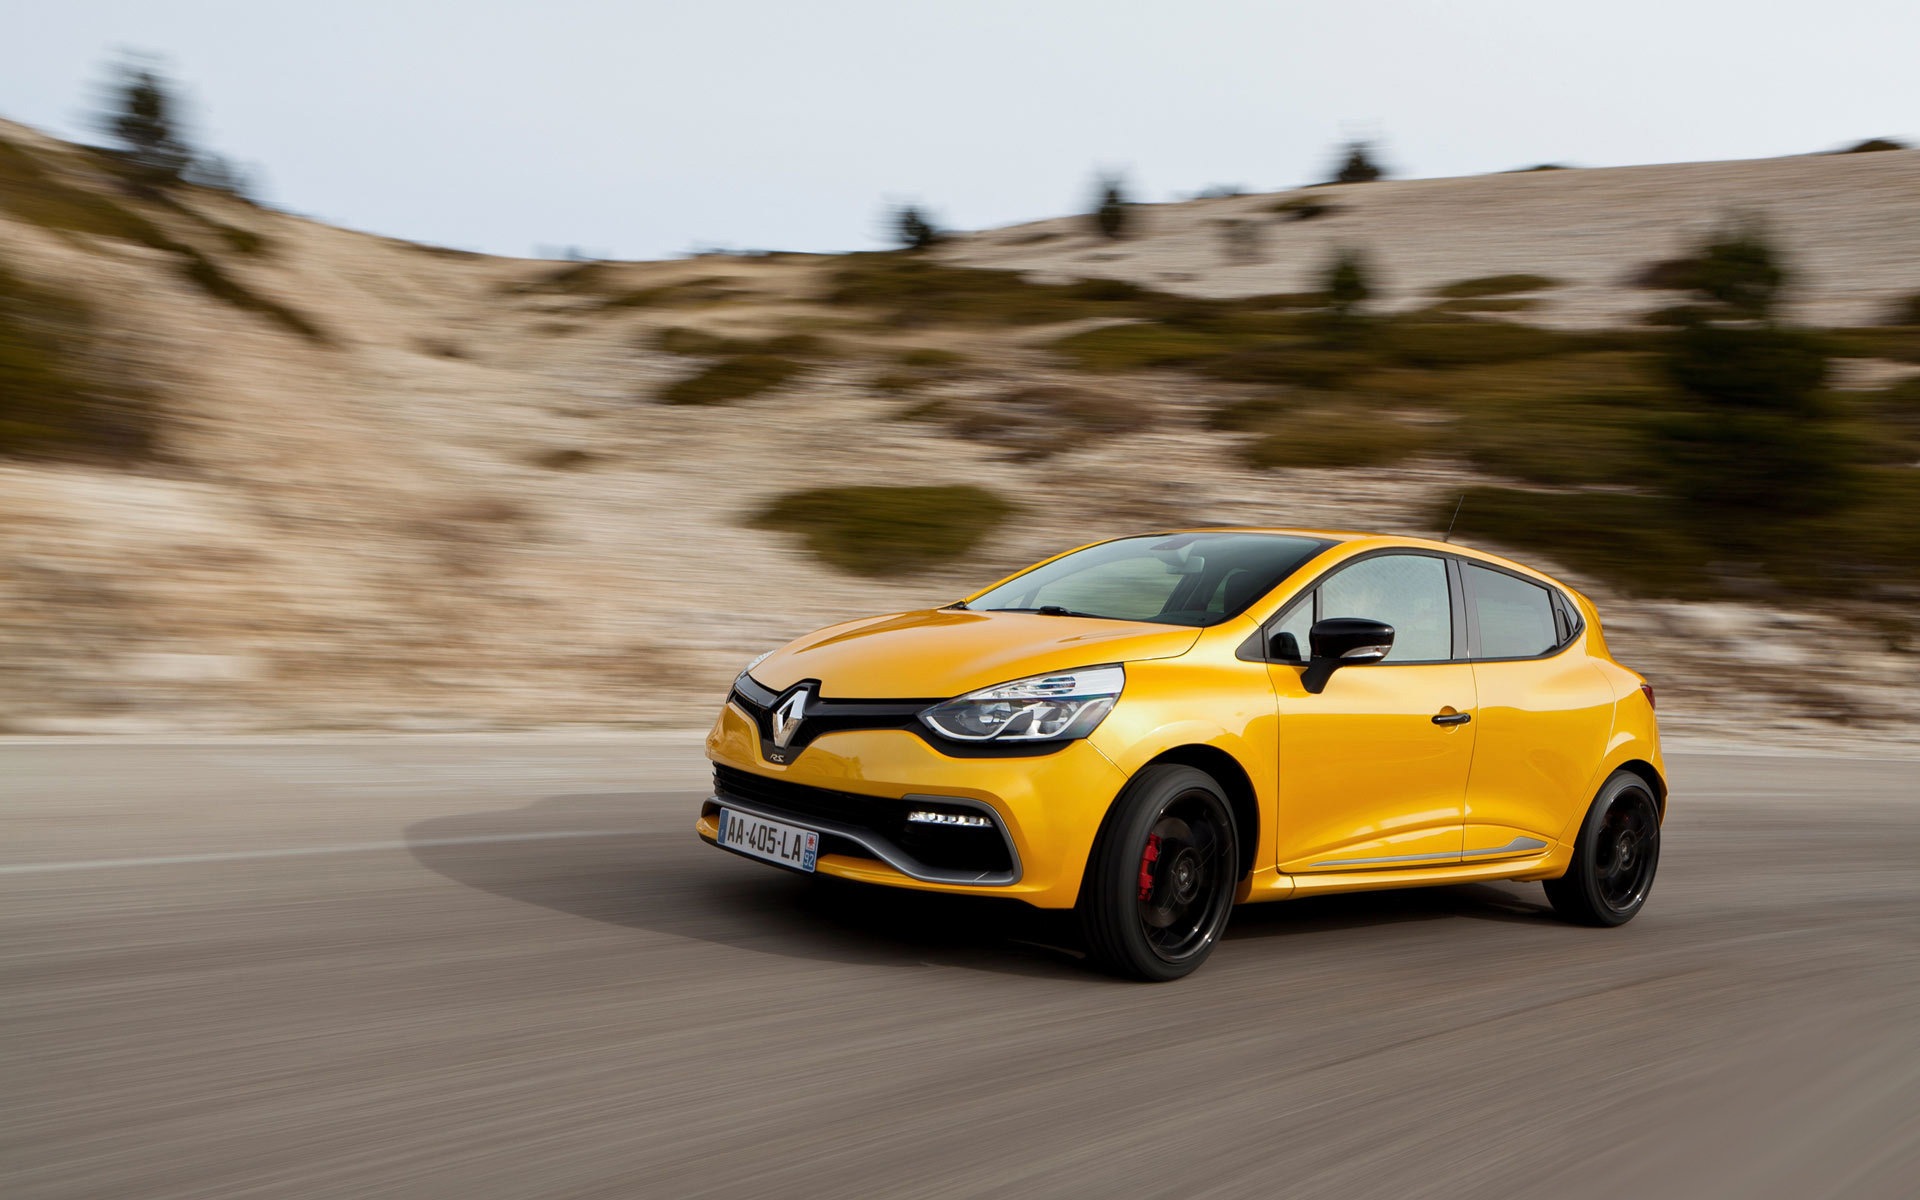 2013 Renault Clio RS 200 yellow color car HD wallpapers #2 - 1920x1200